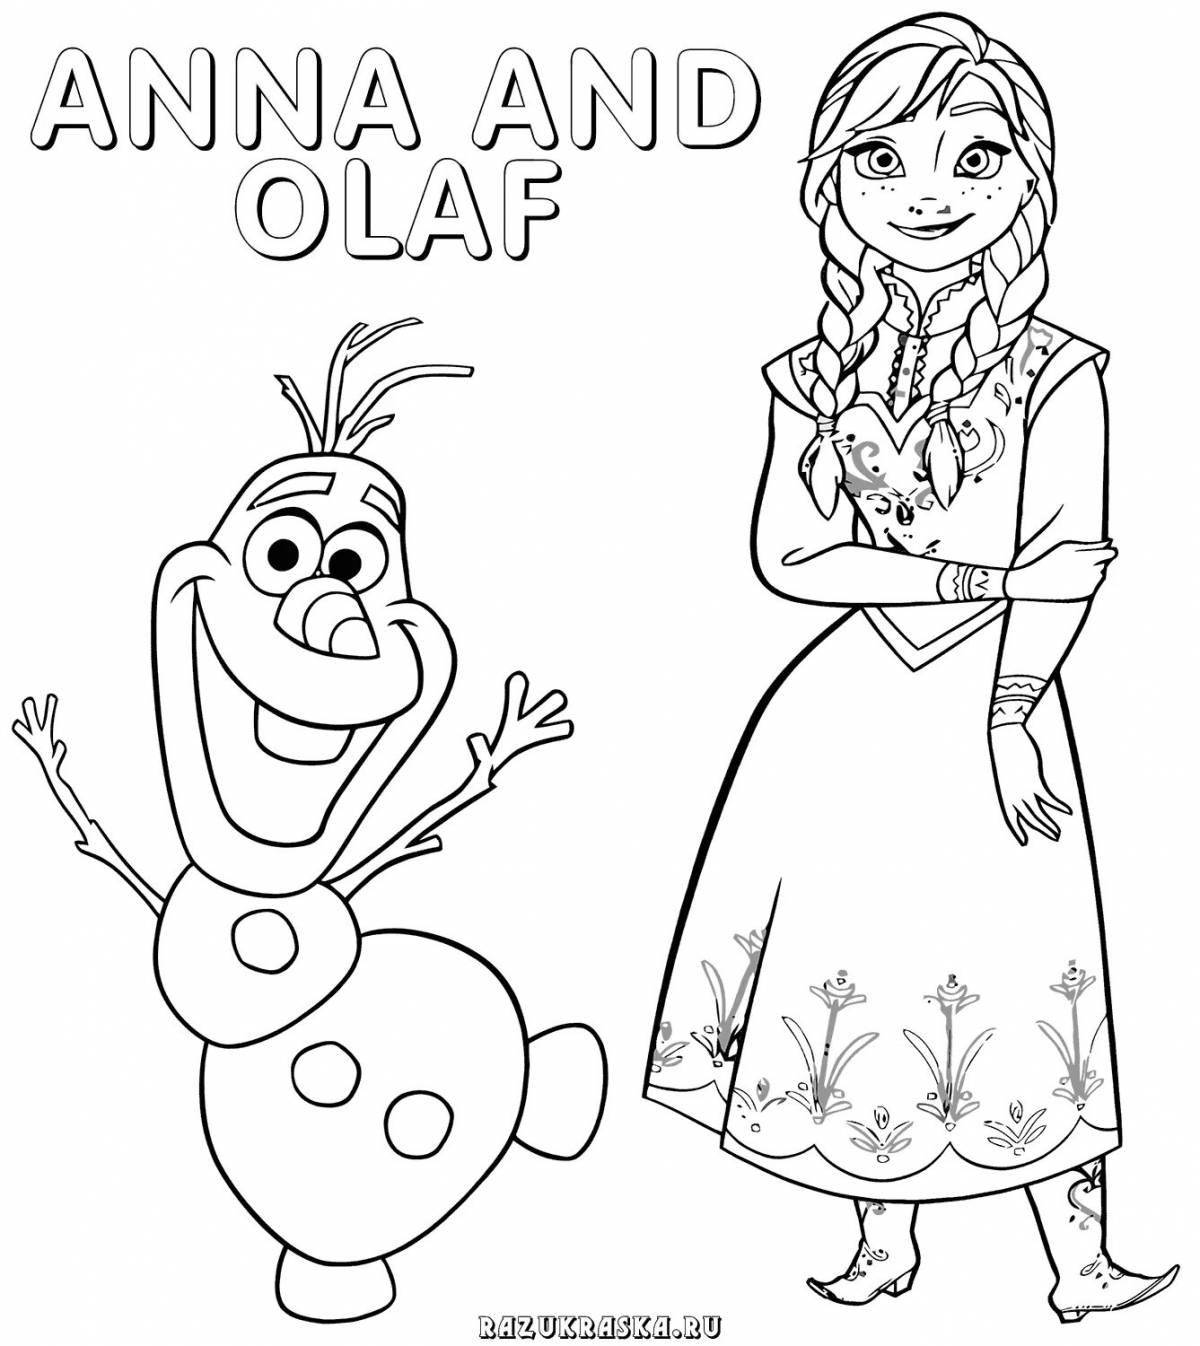 Anna fairytale coloring for kids